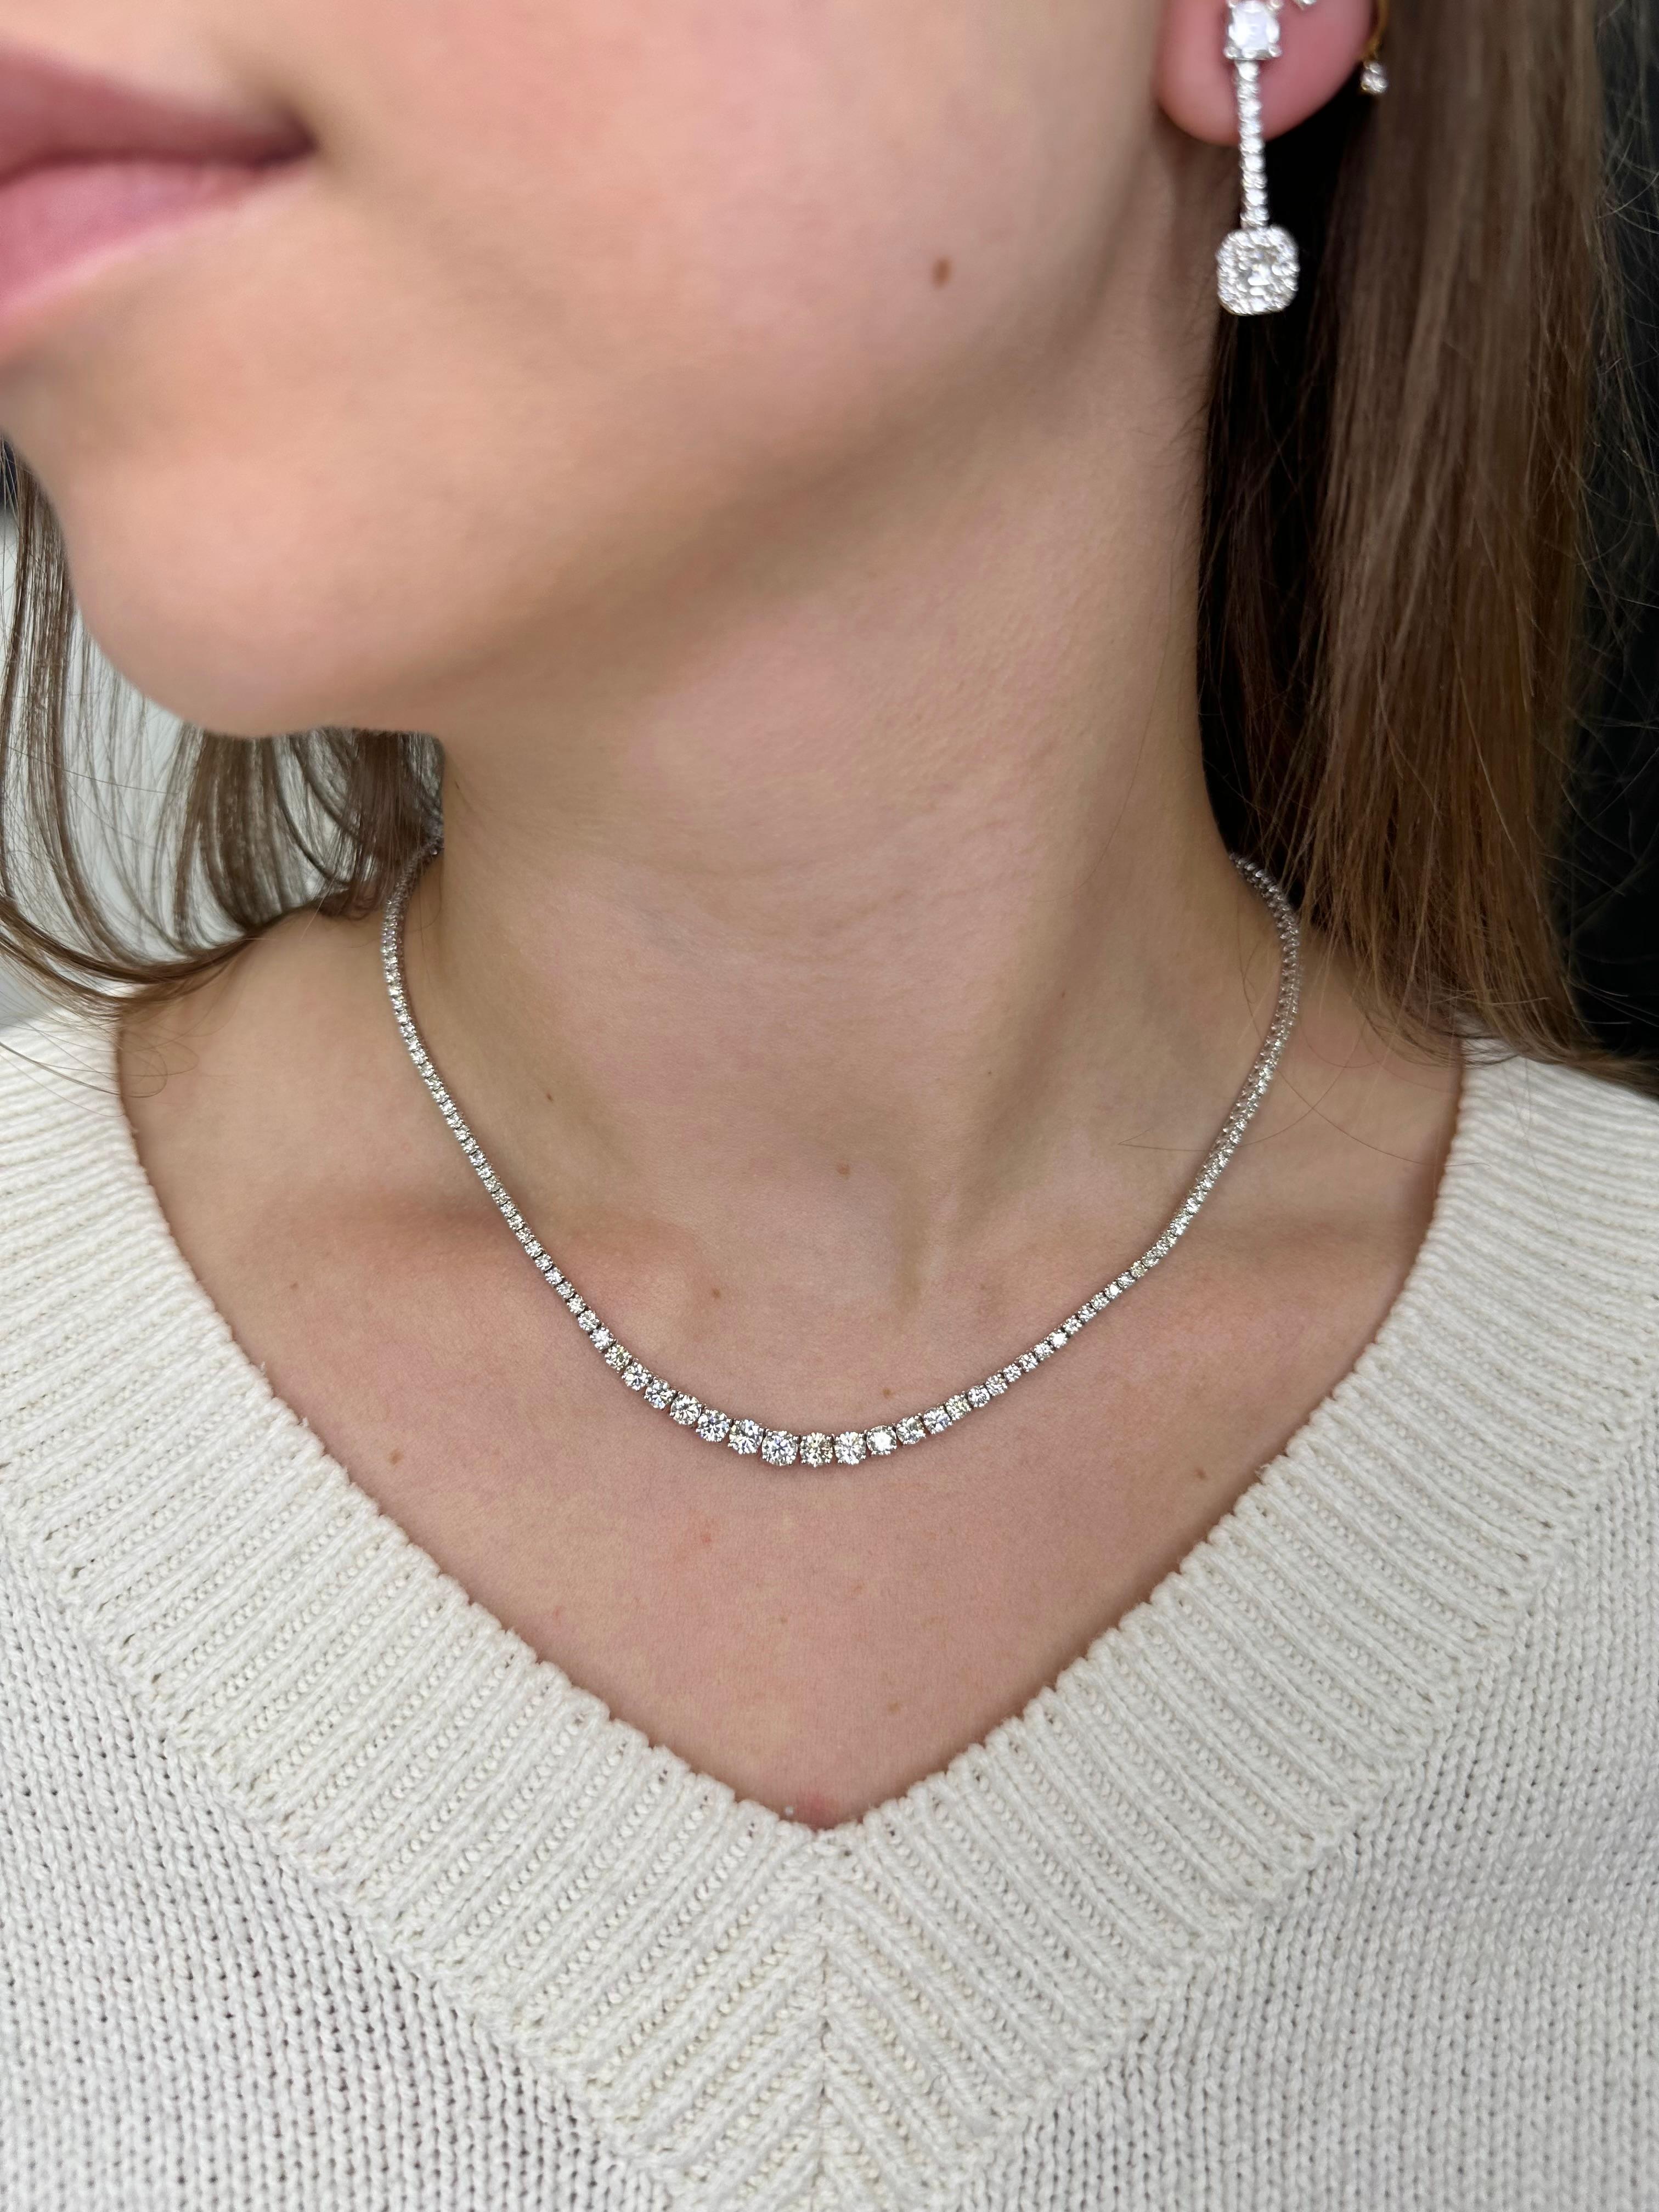 6.2 Carat Graduated Diamond Tennis Necklace in 14k White Gold by Gem Jewelers Co In New Condition For Sale In Miami, FL